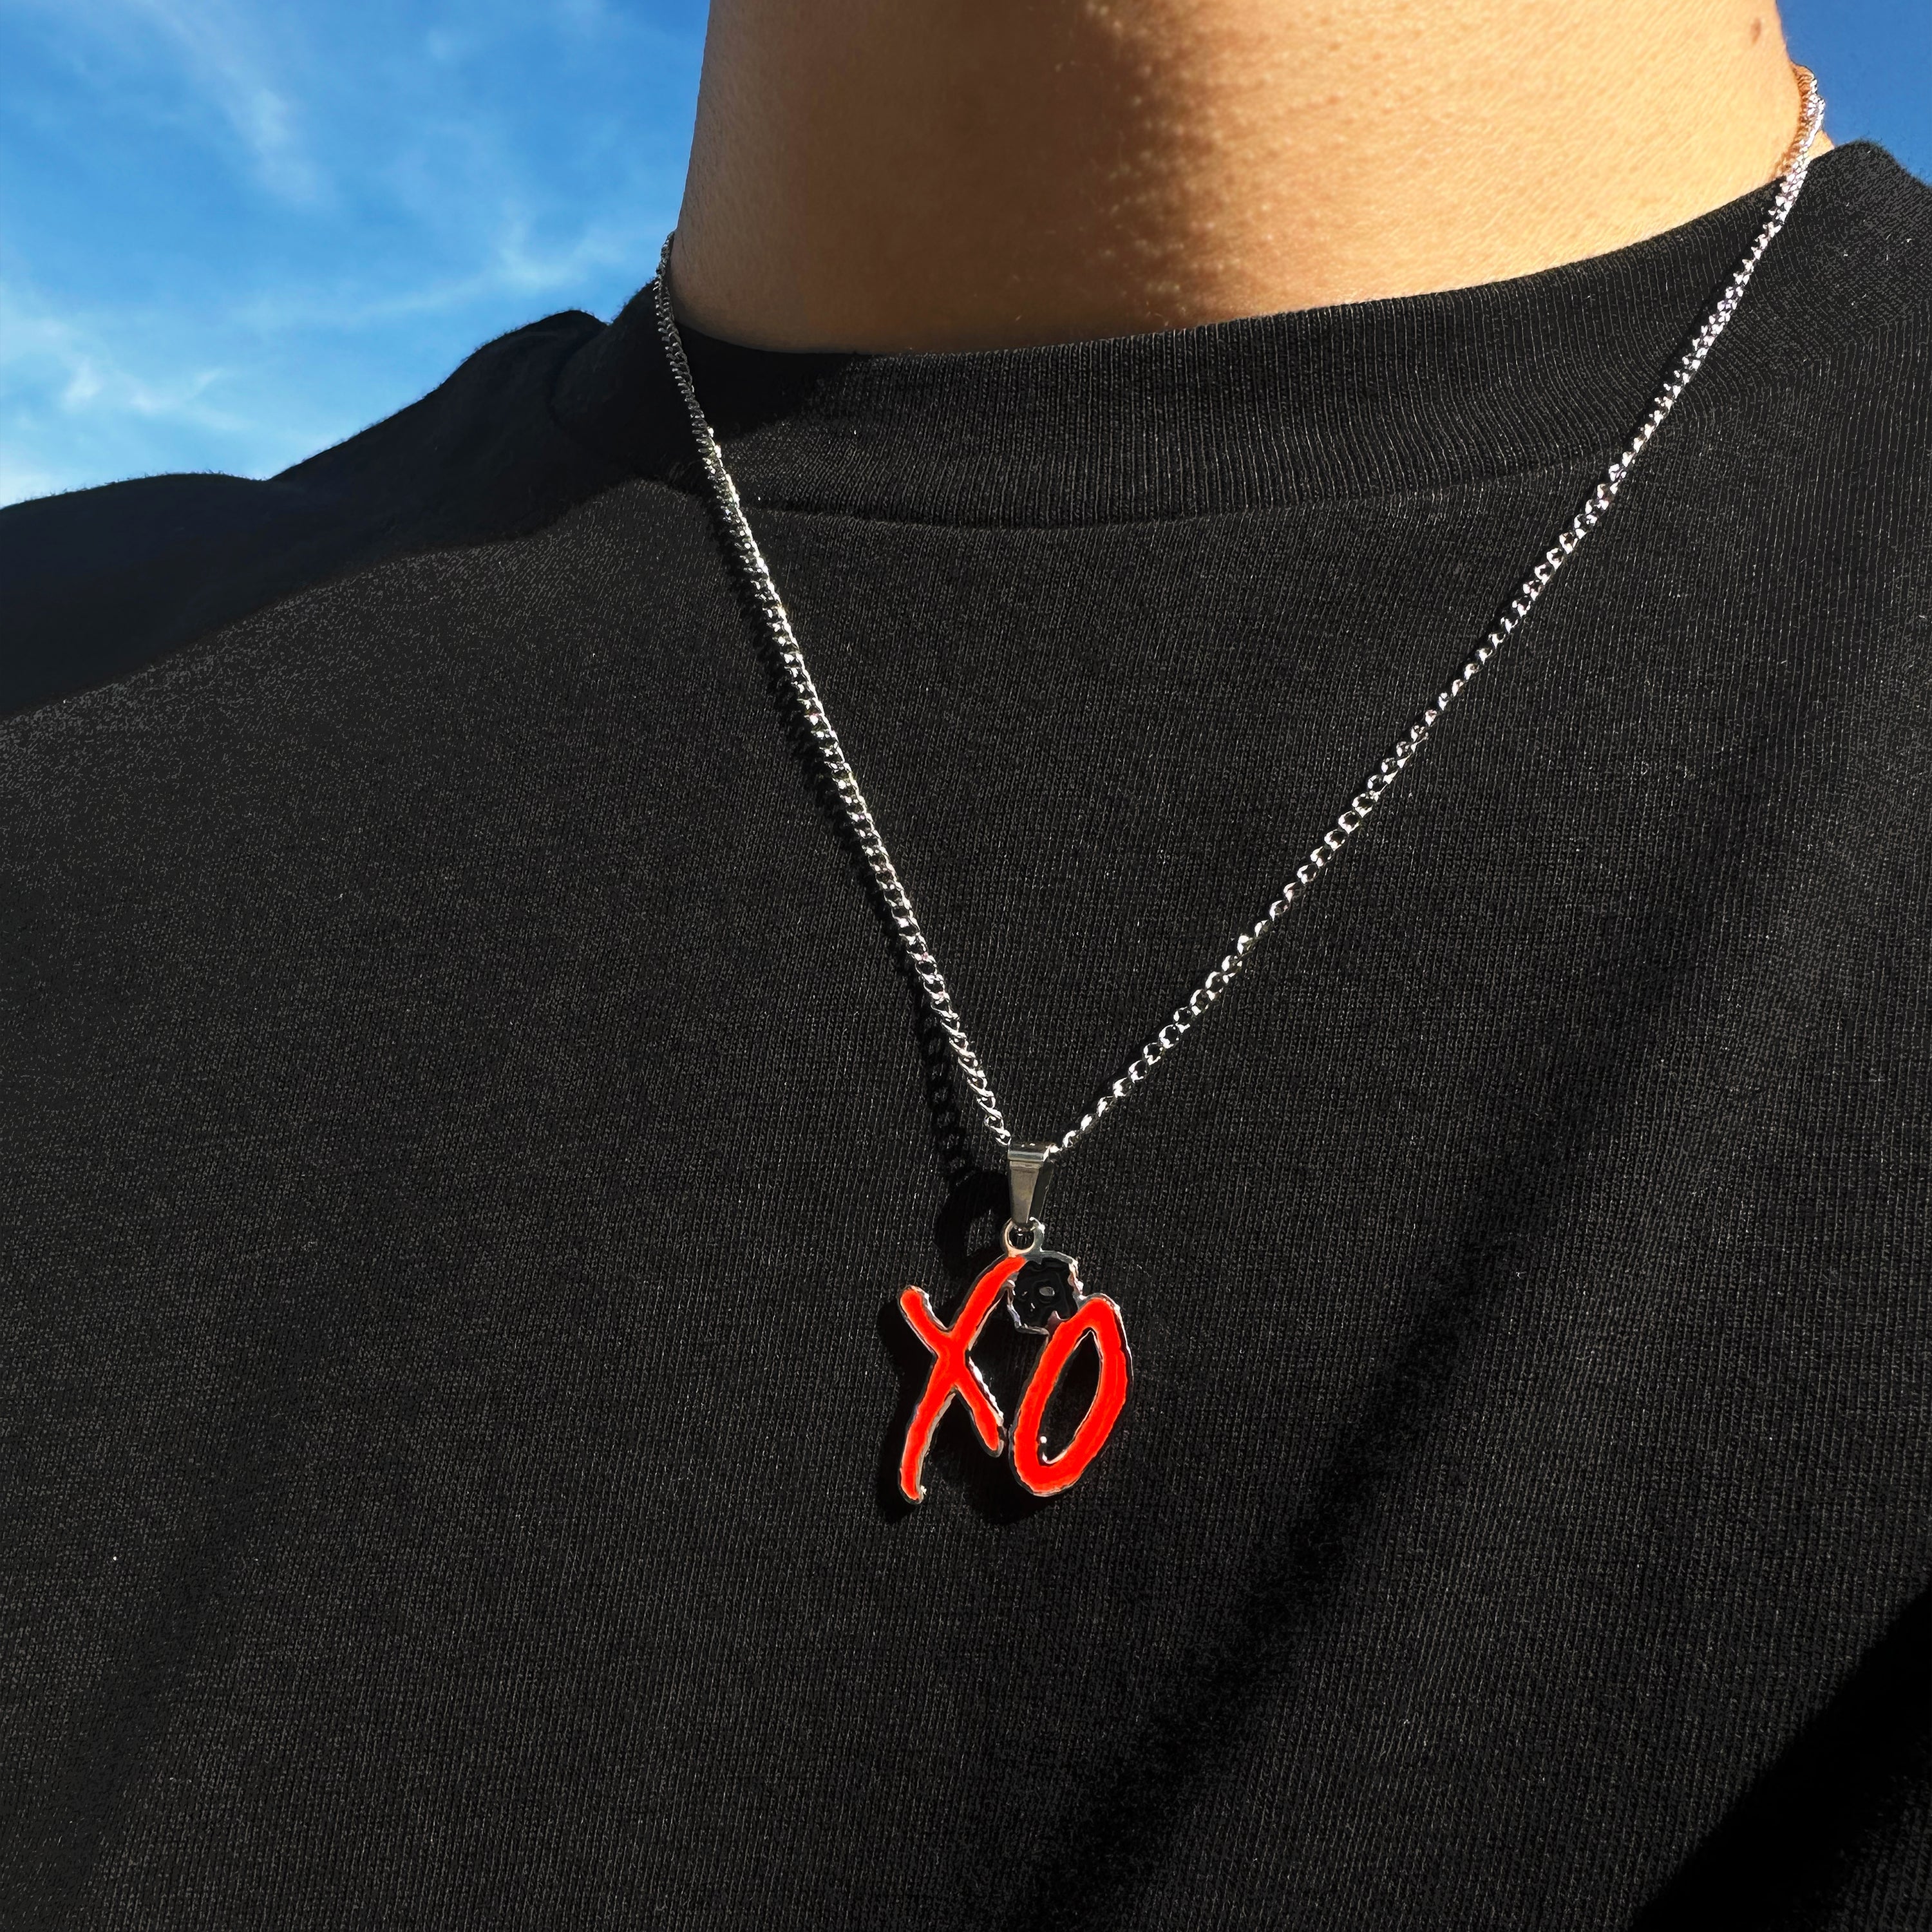 Exquisite Creative Bubble Letter Xo Inlaid White Zircon Pendant Necklace  Men's Fashion Casual Party Jewelry Holiday Gifts - AliExpress